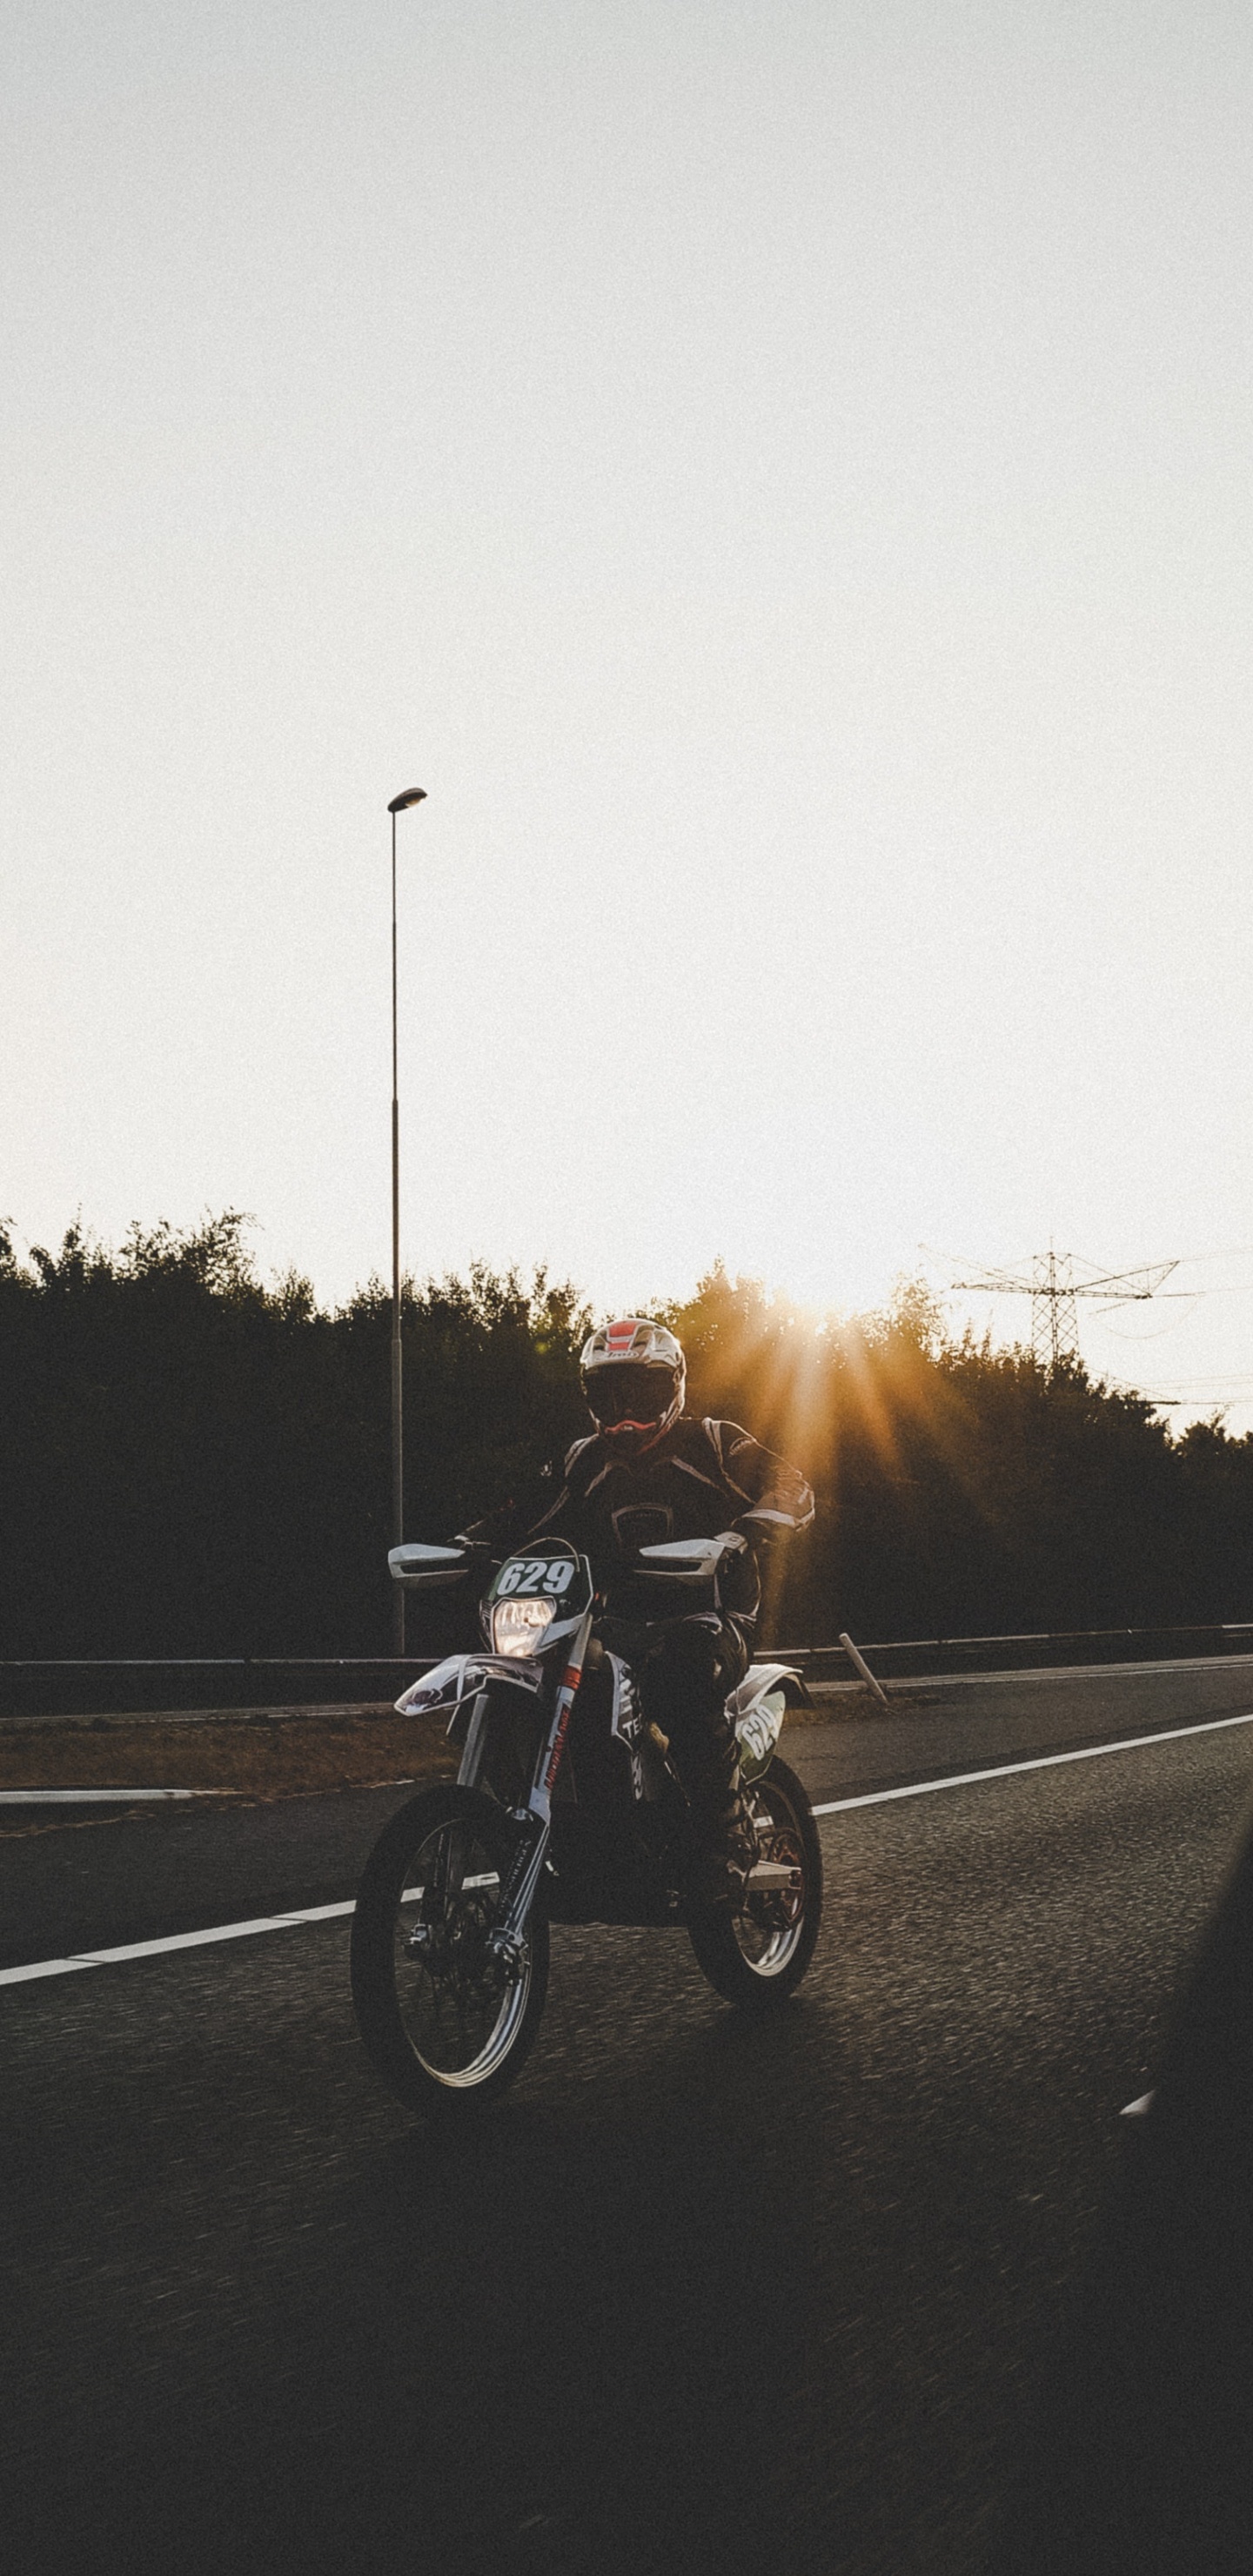 Man Riding Motorcycle on Road During Sunset. Wallpaper in 1440x2960 Resolution